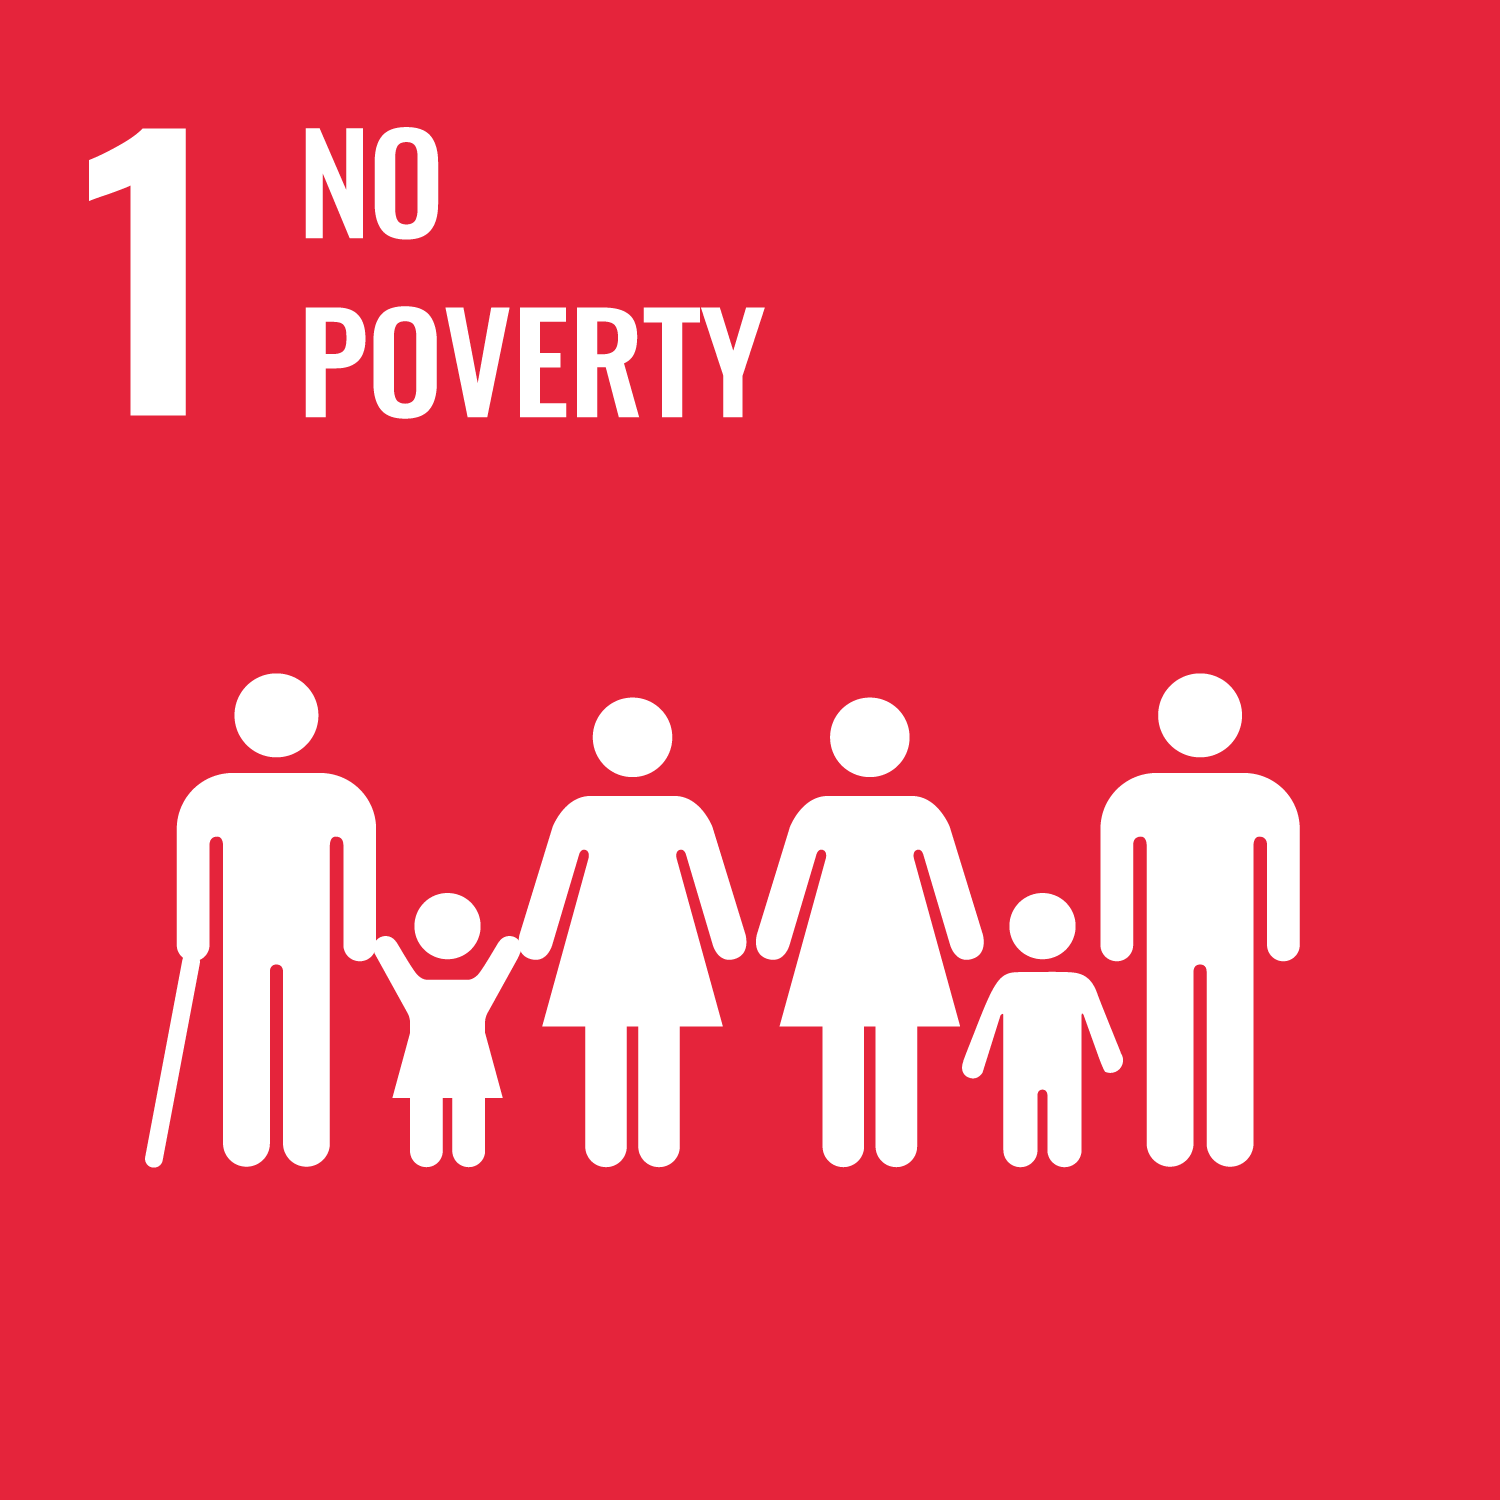 United Nations Sustainable Development Goal Number 1 No Poverty